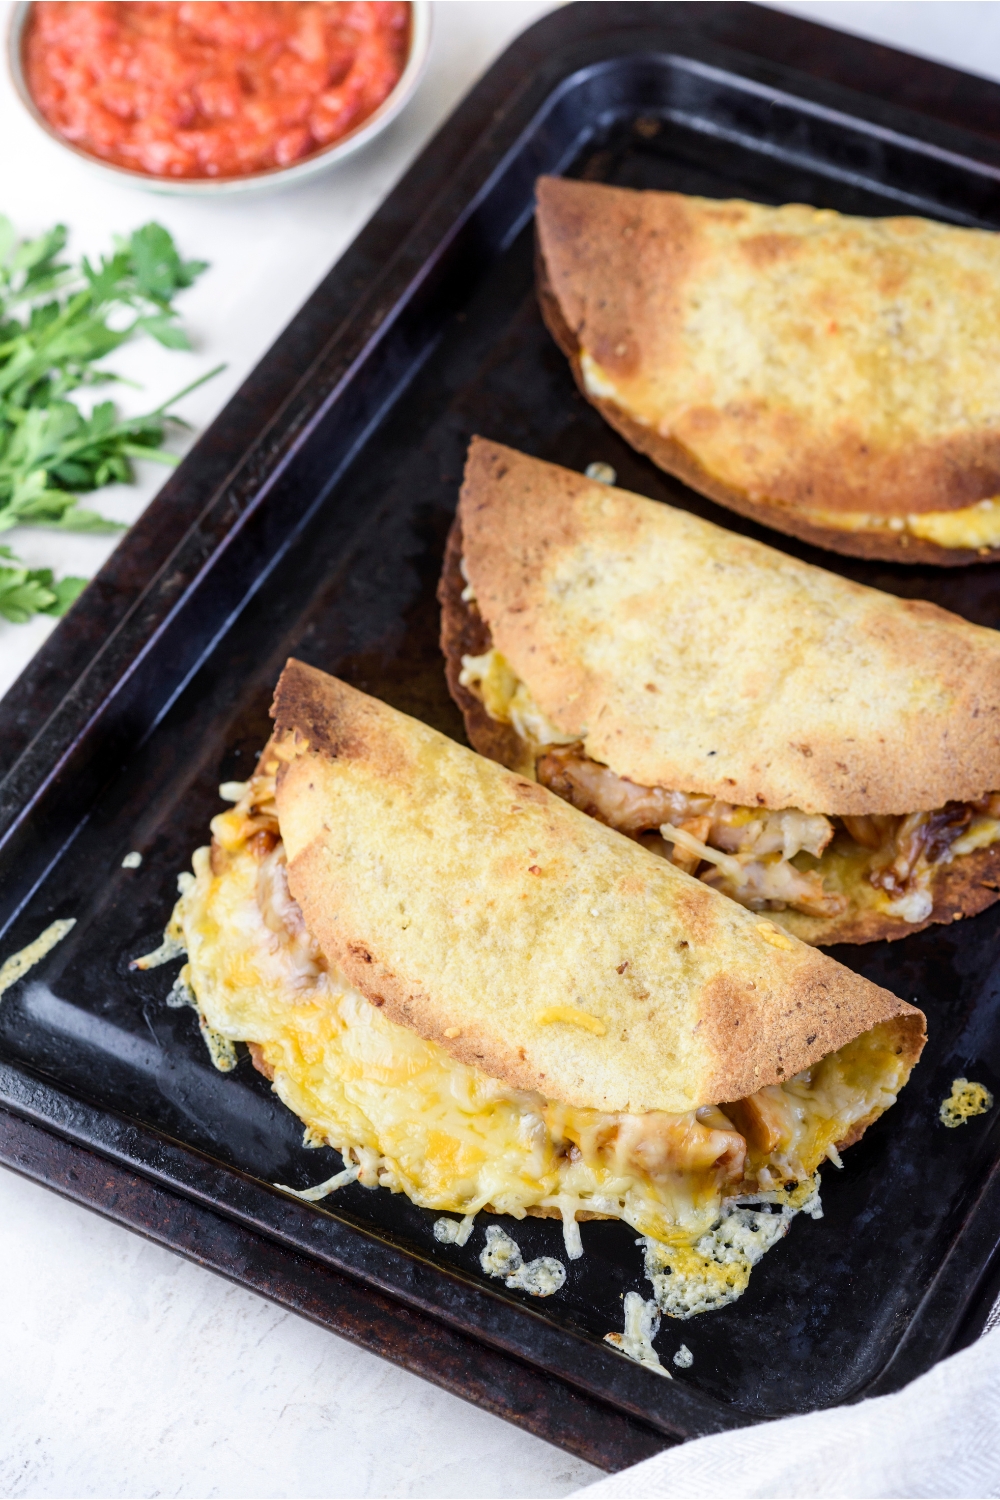 Three crispy tortillas on a baking sheet stuffed with meat and melted cheese.